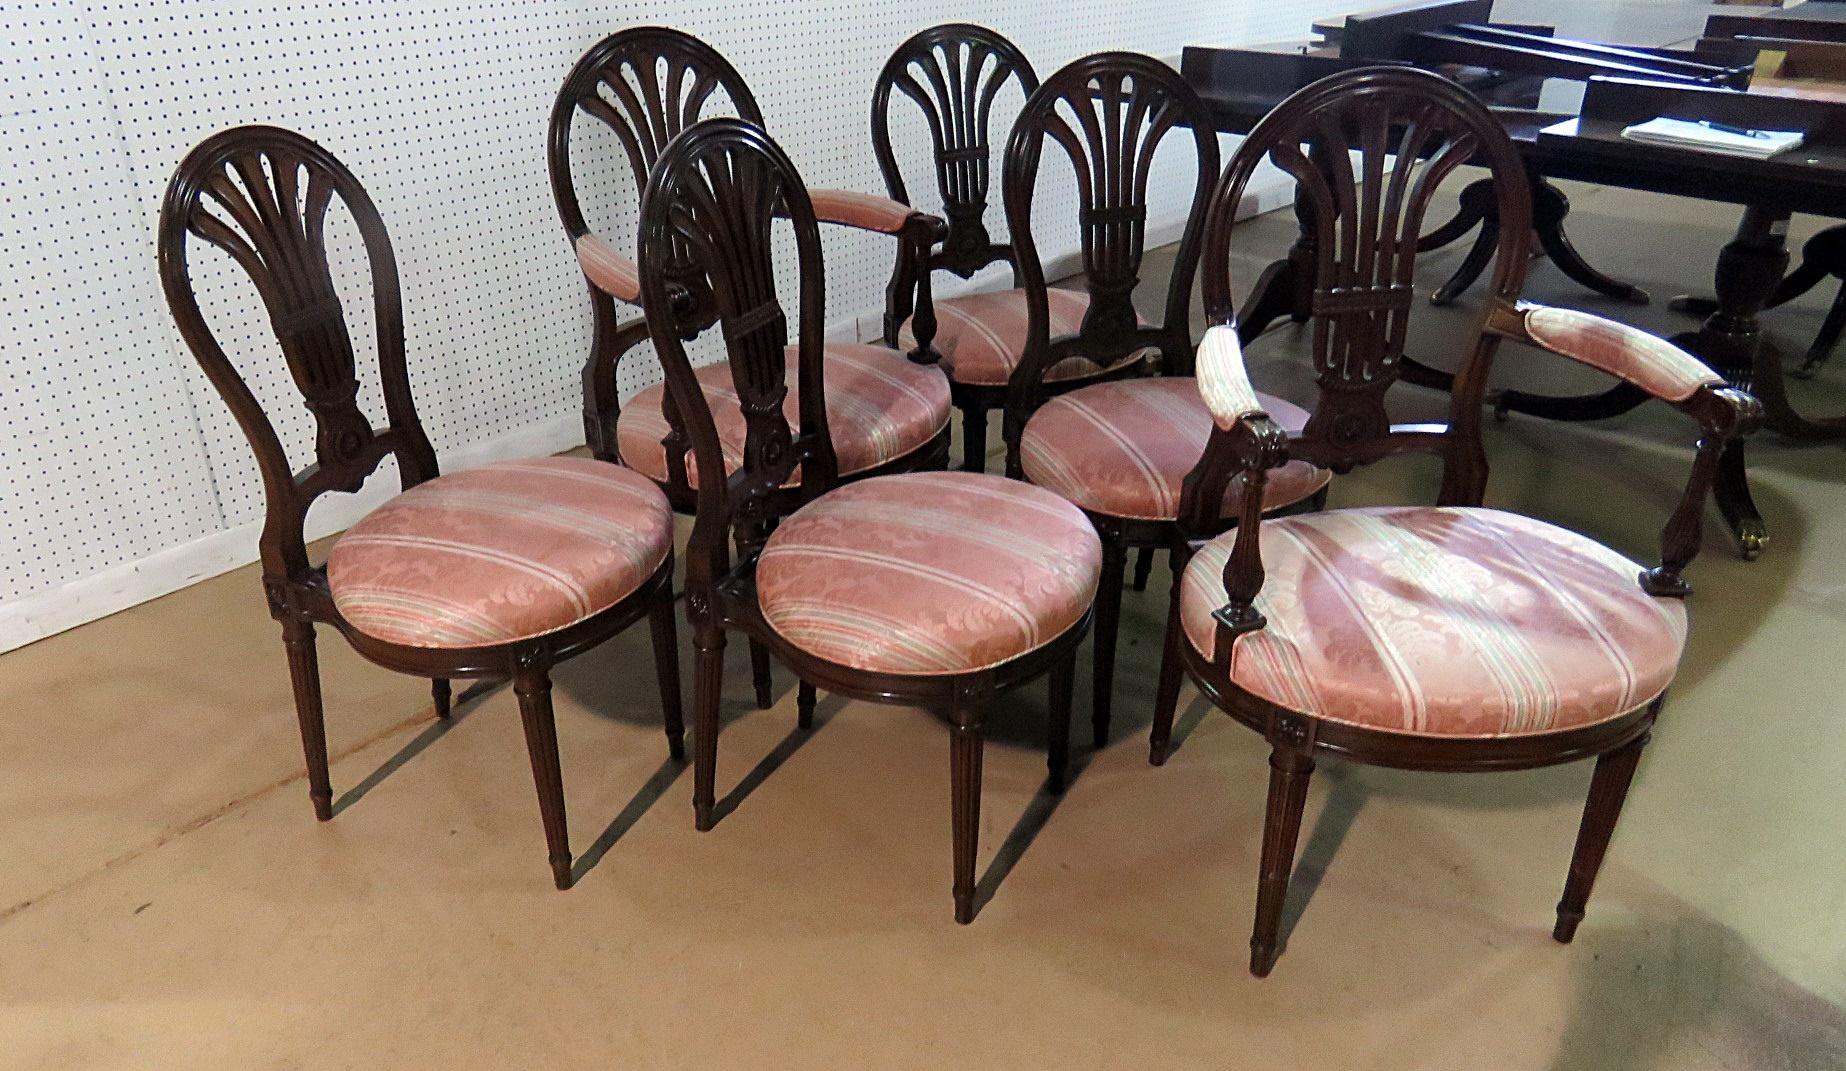 Set of 6 Louis XVI style dining chairs, attributed to Jansen. The 2 armchairs measure 39.5